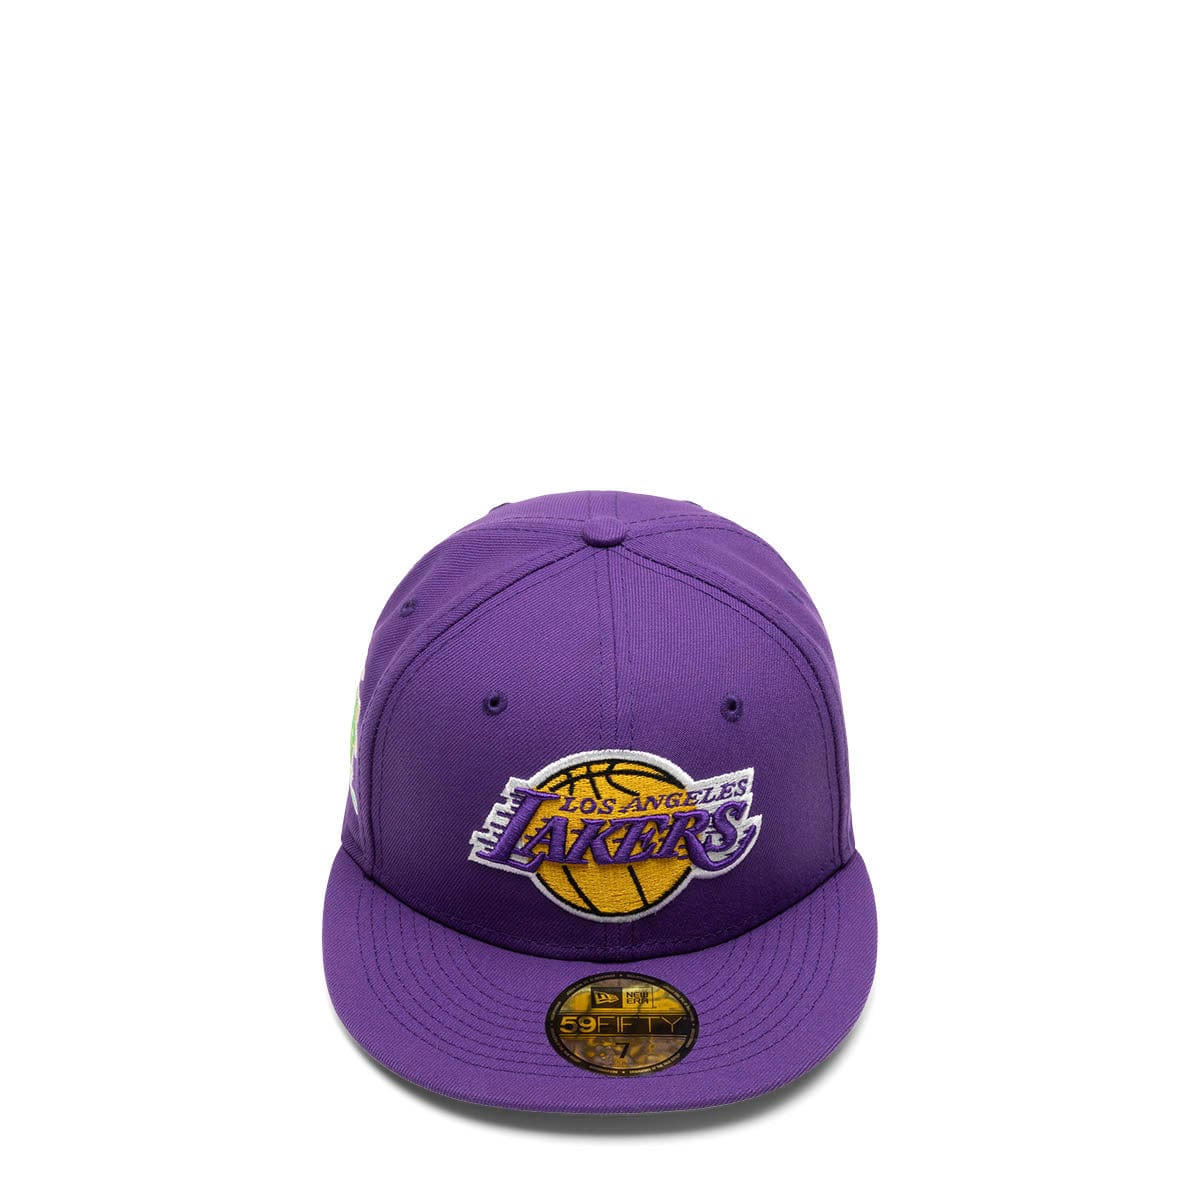 Lakers Draft hat, Men's Fashion, Watches & Accessories, Caps